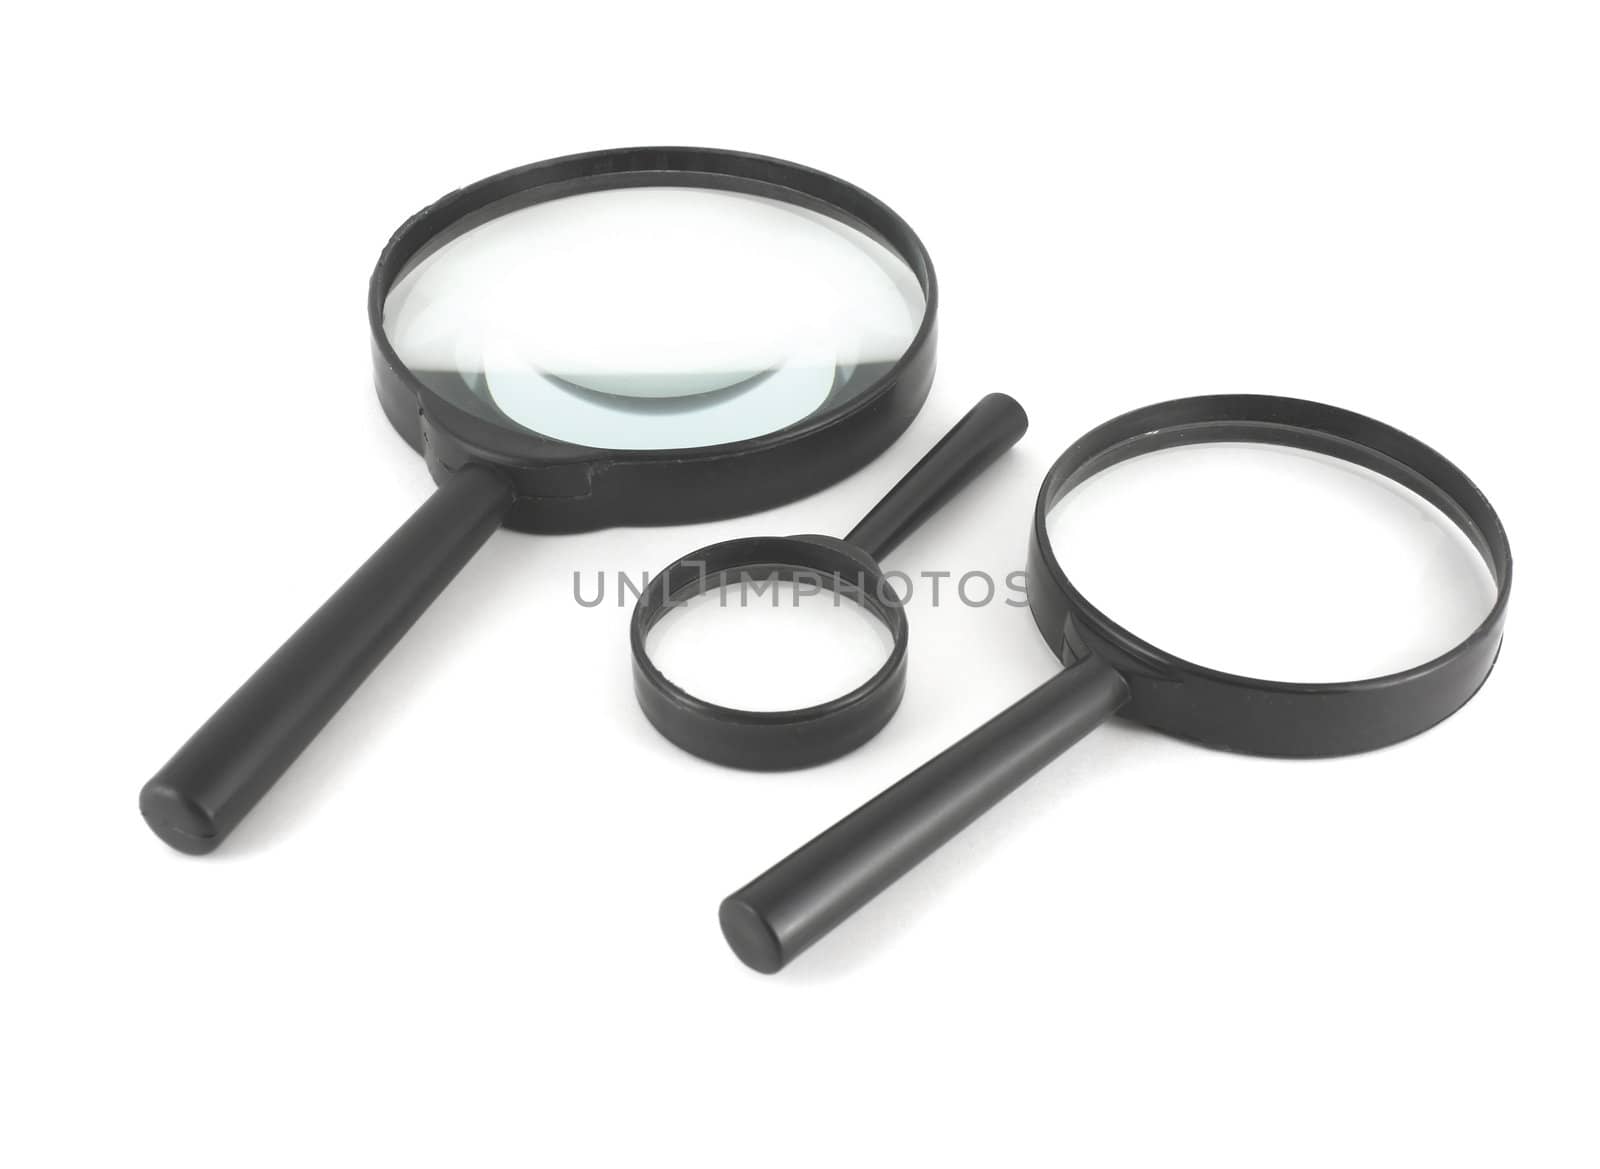 Three magnifiers